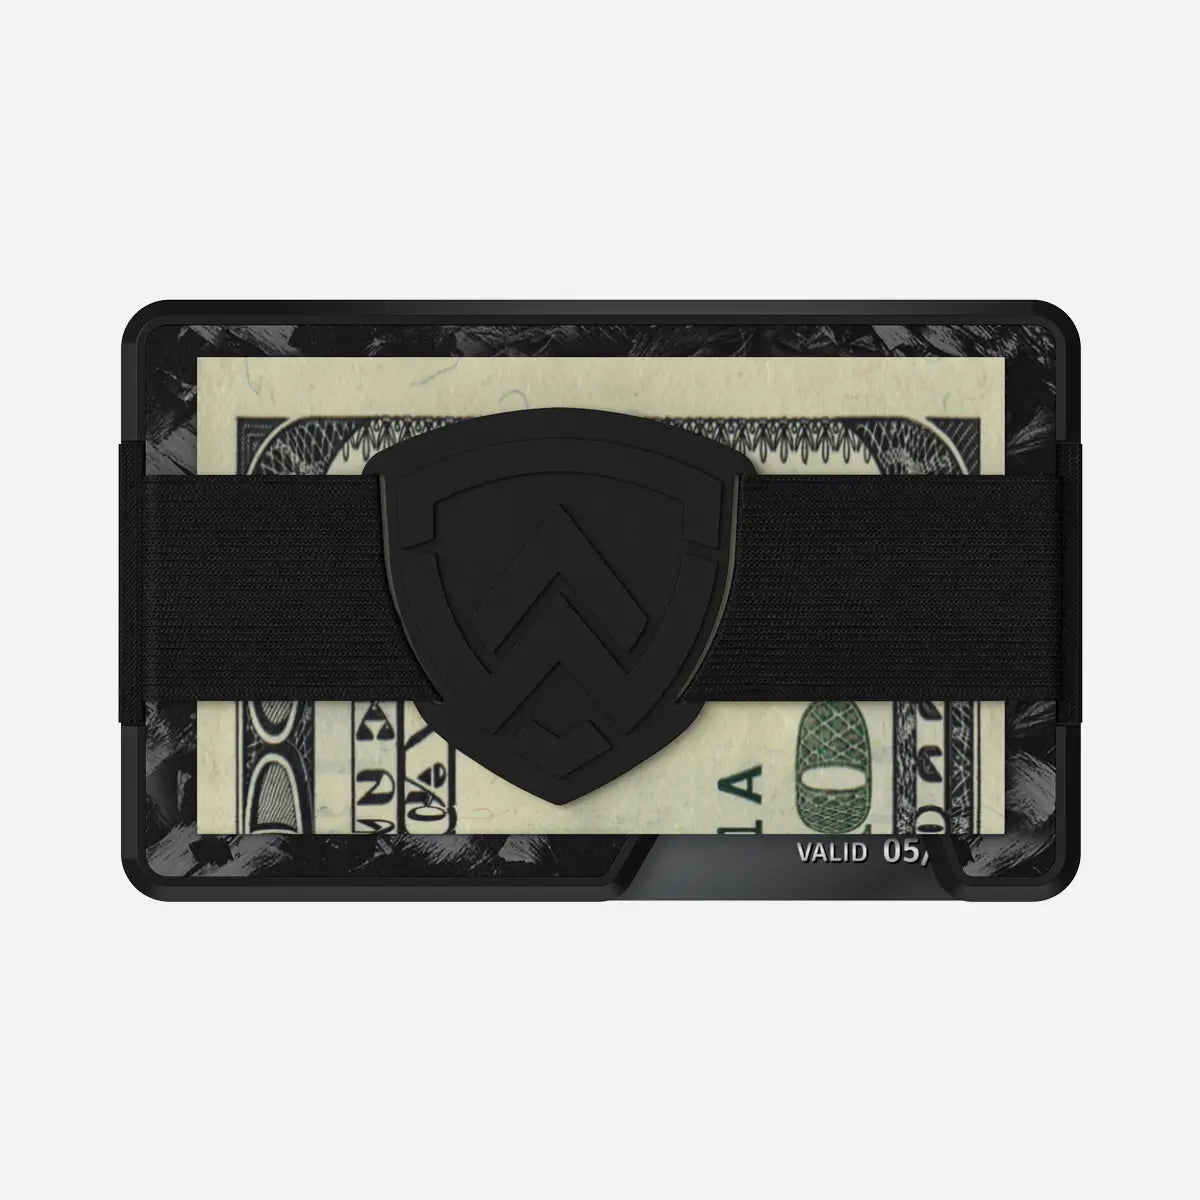 Axwell Wallet SE - Forged Carbon Fiber